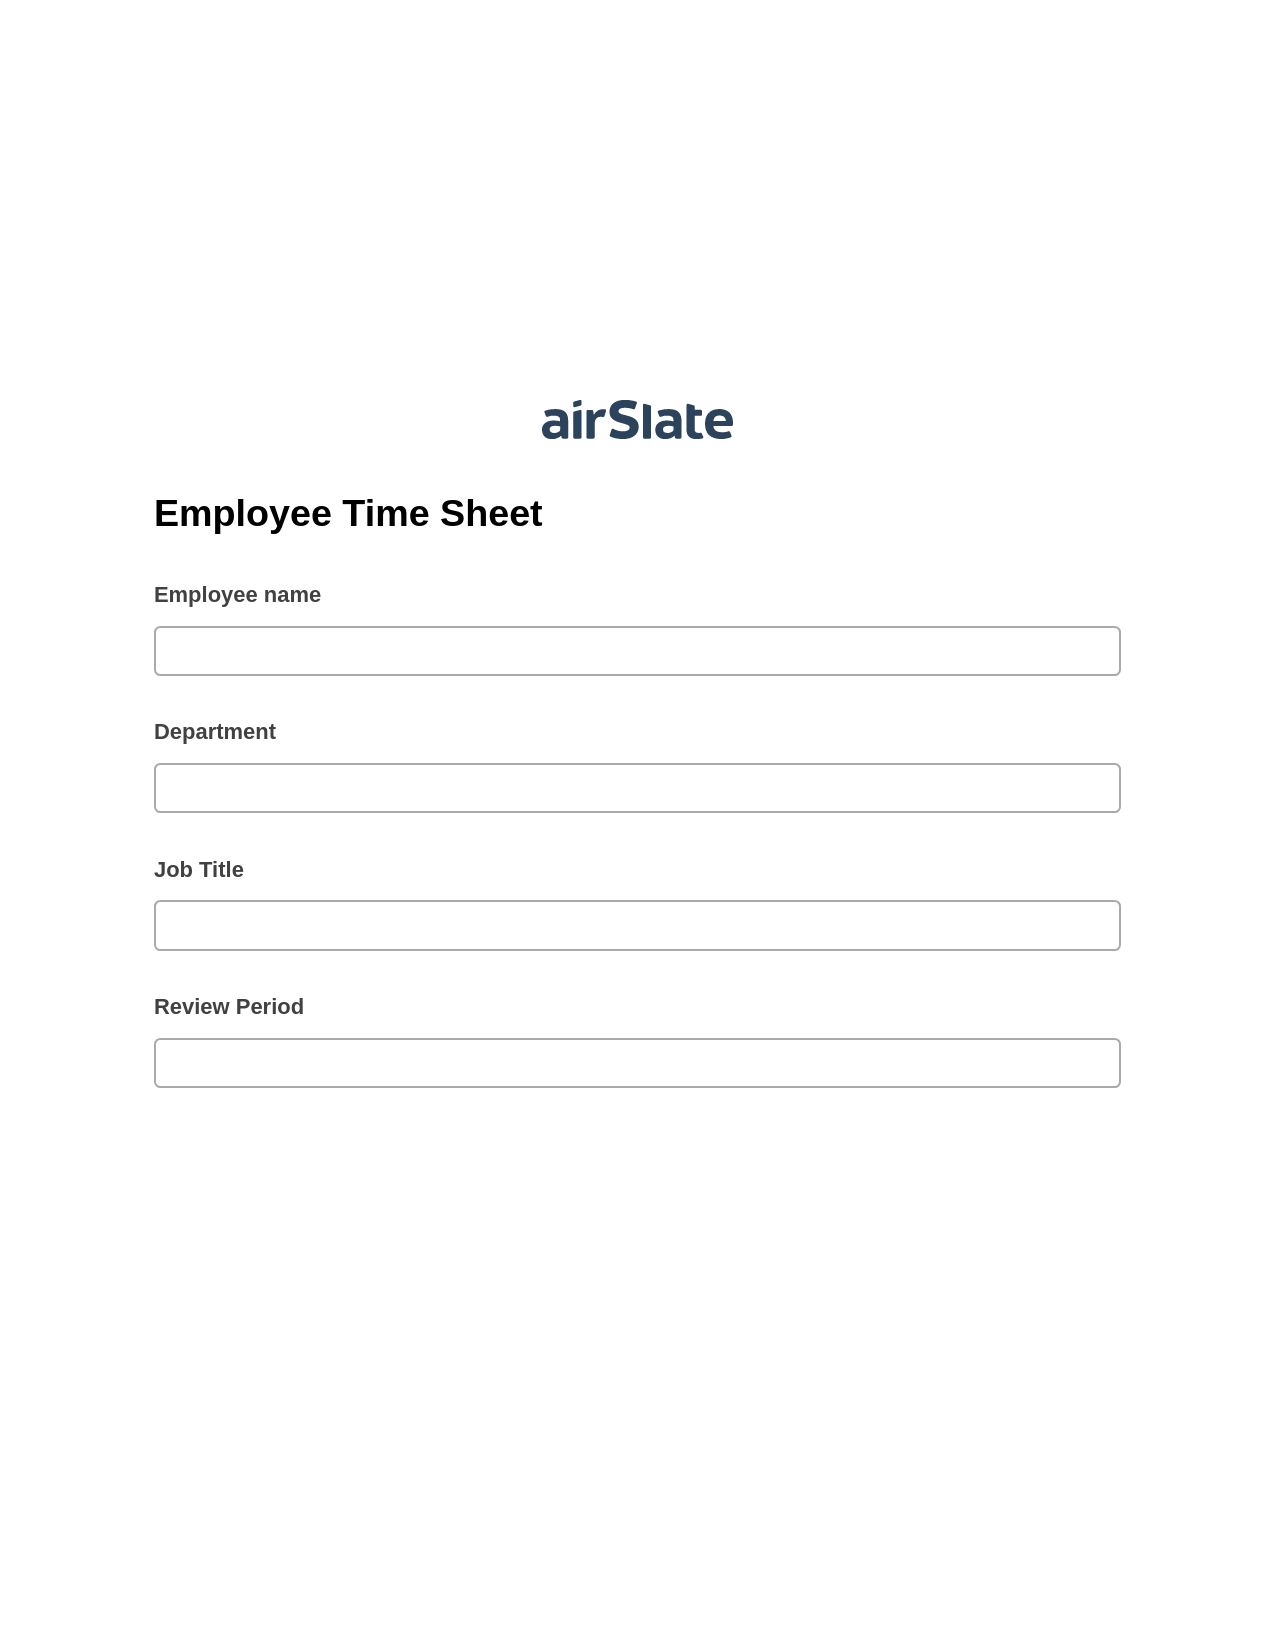 Employee Time Sheet Pre-fill from MS Dynamics 365 Records, Lock the Slate Bot, Export to WebMerge Bot